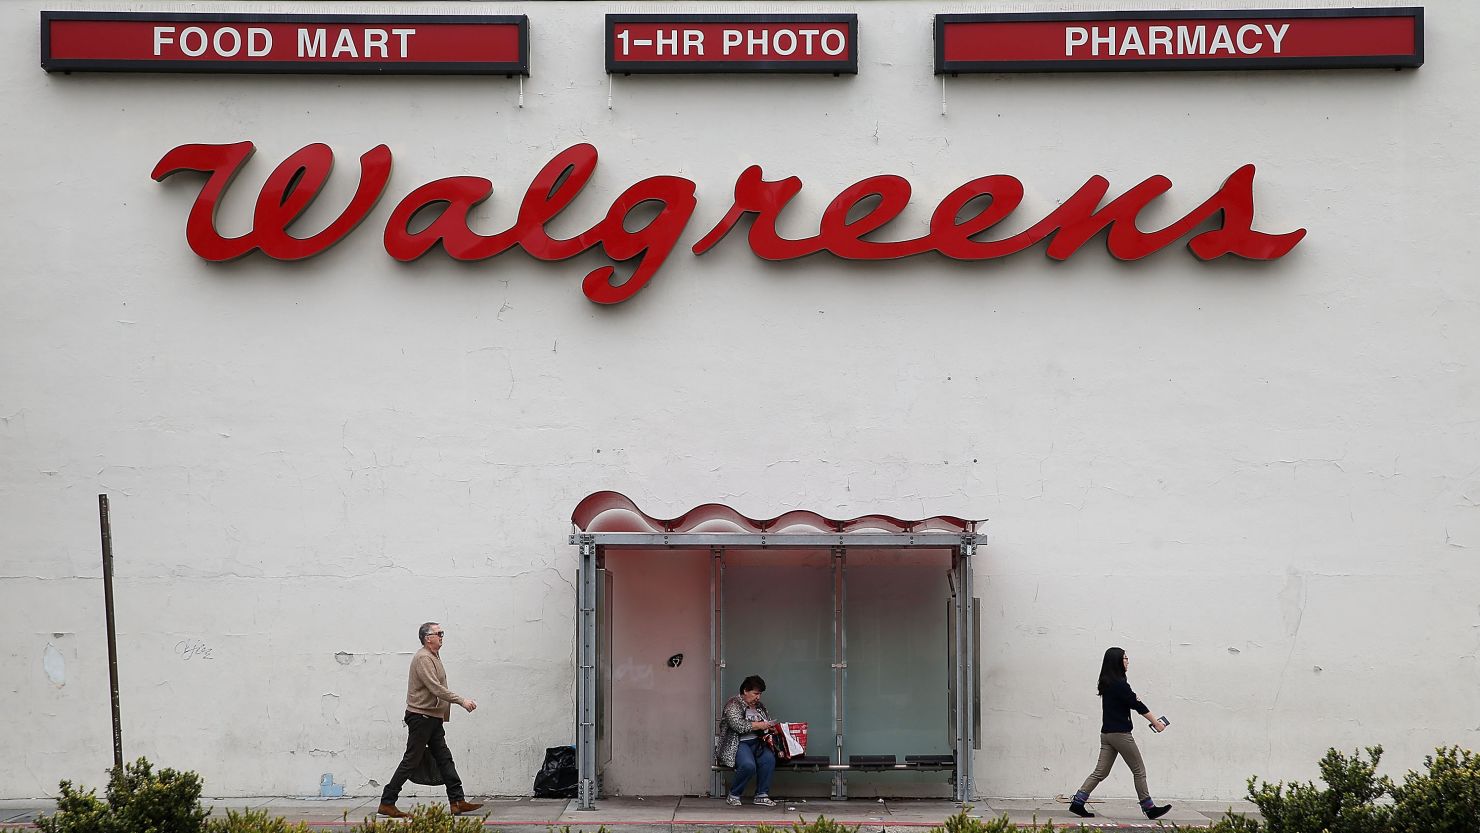 Walgreens said it had no legal obligation to contact the woman's doctor.